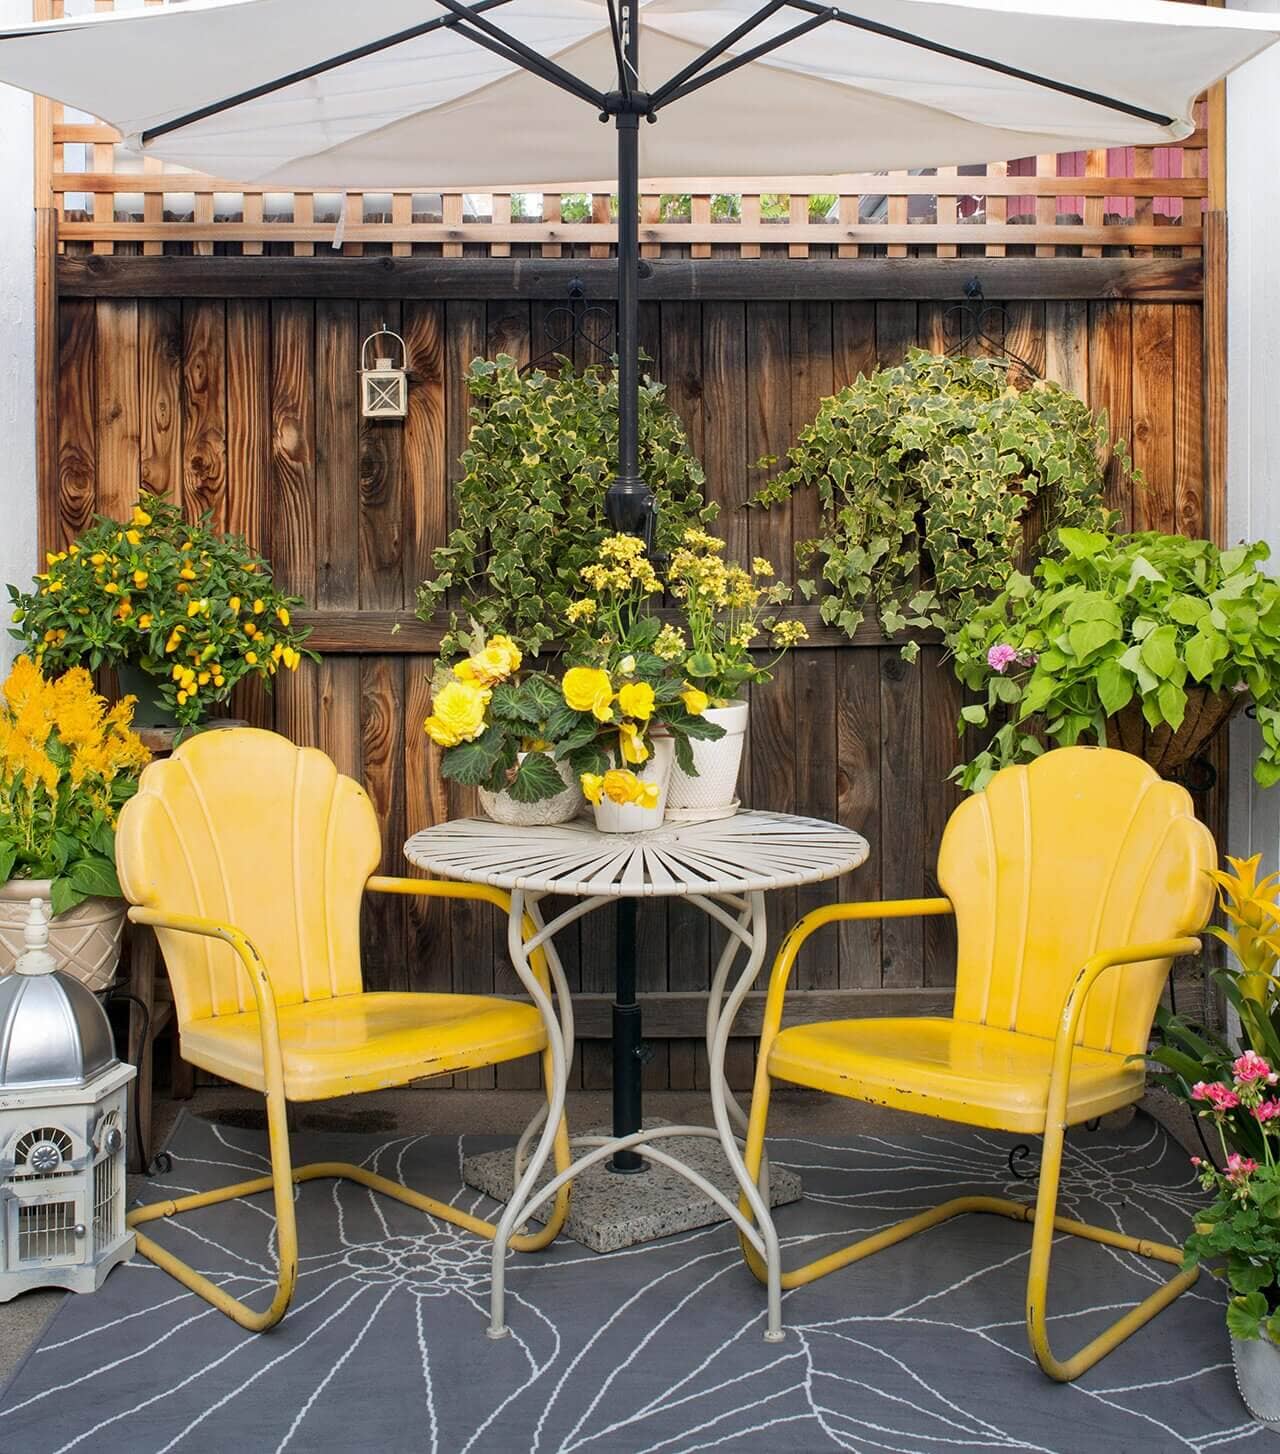 25 fabulous ideas to turn patios into inviting outdoor spaces - 79